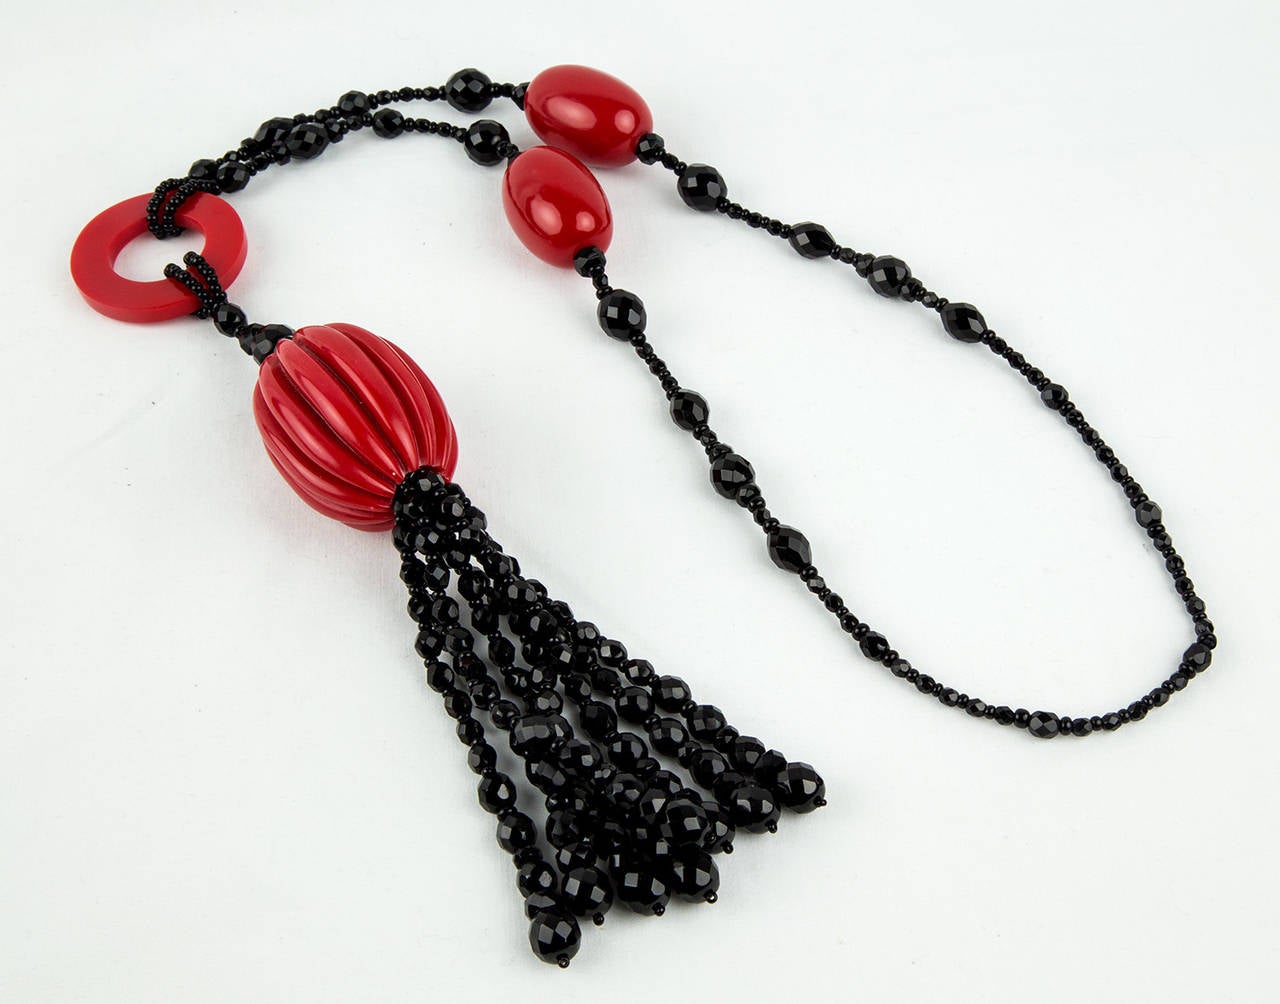 Stunning Red Celluloid and Black faceted Jet Bead Statement Necklace; reminiscent of the Flapper era, necklaces of the Roaring 1920s! Measures approx. 26” long (no clasp) not including the tassel. Red celluloid ring and assorted faceted black jet